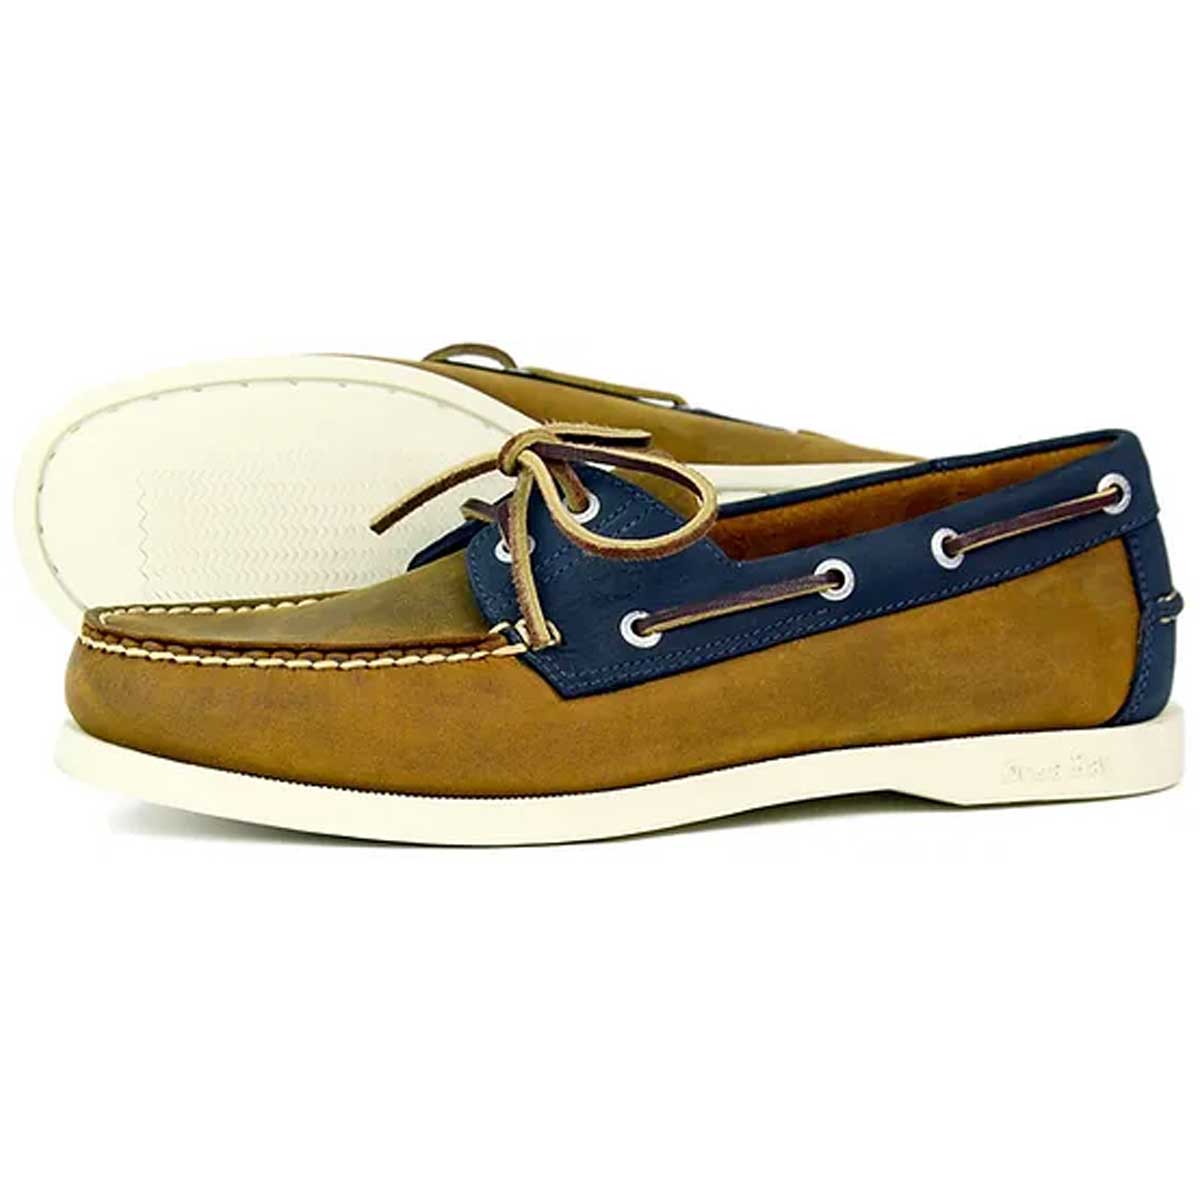 ORCA BAY Men's Clovelly Leather Deck Shoes - Sand / Navy